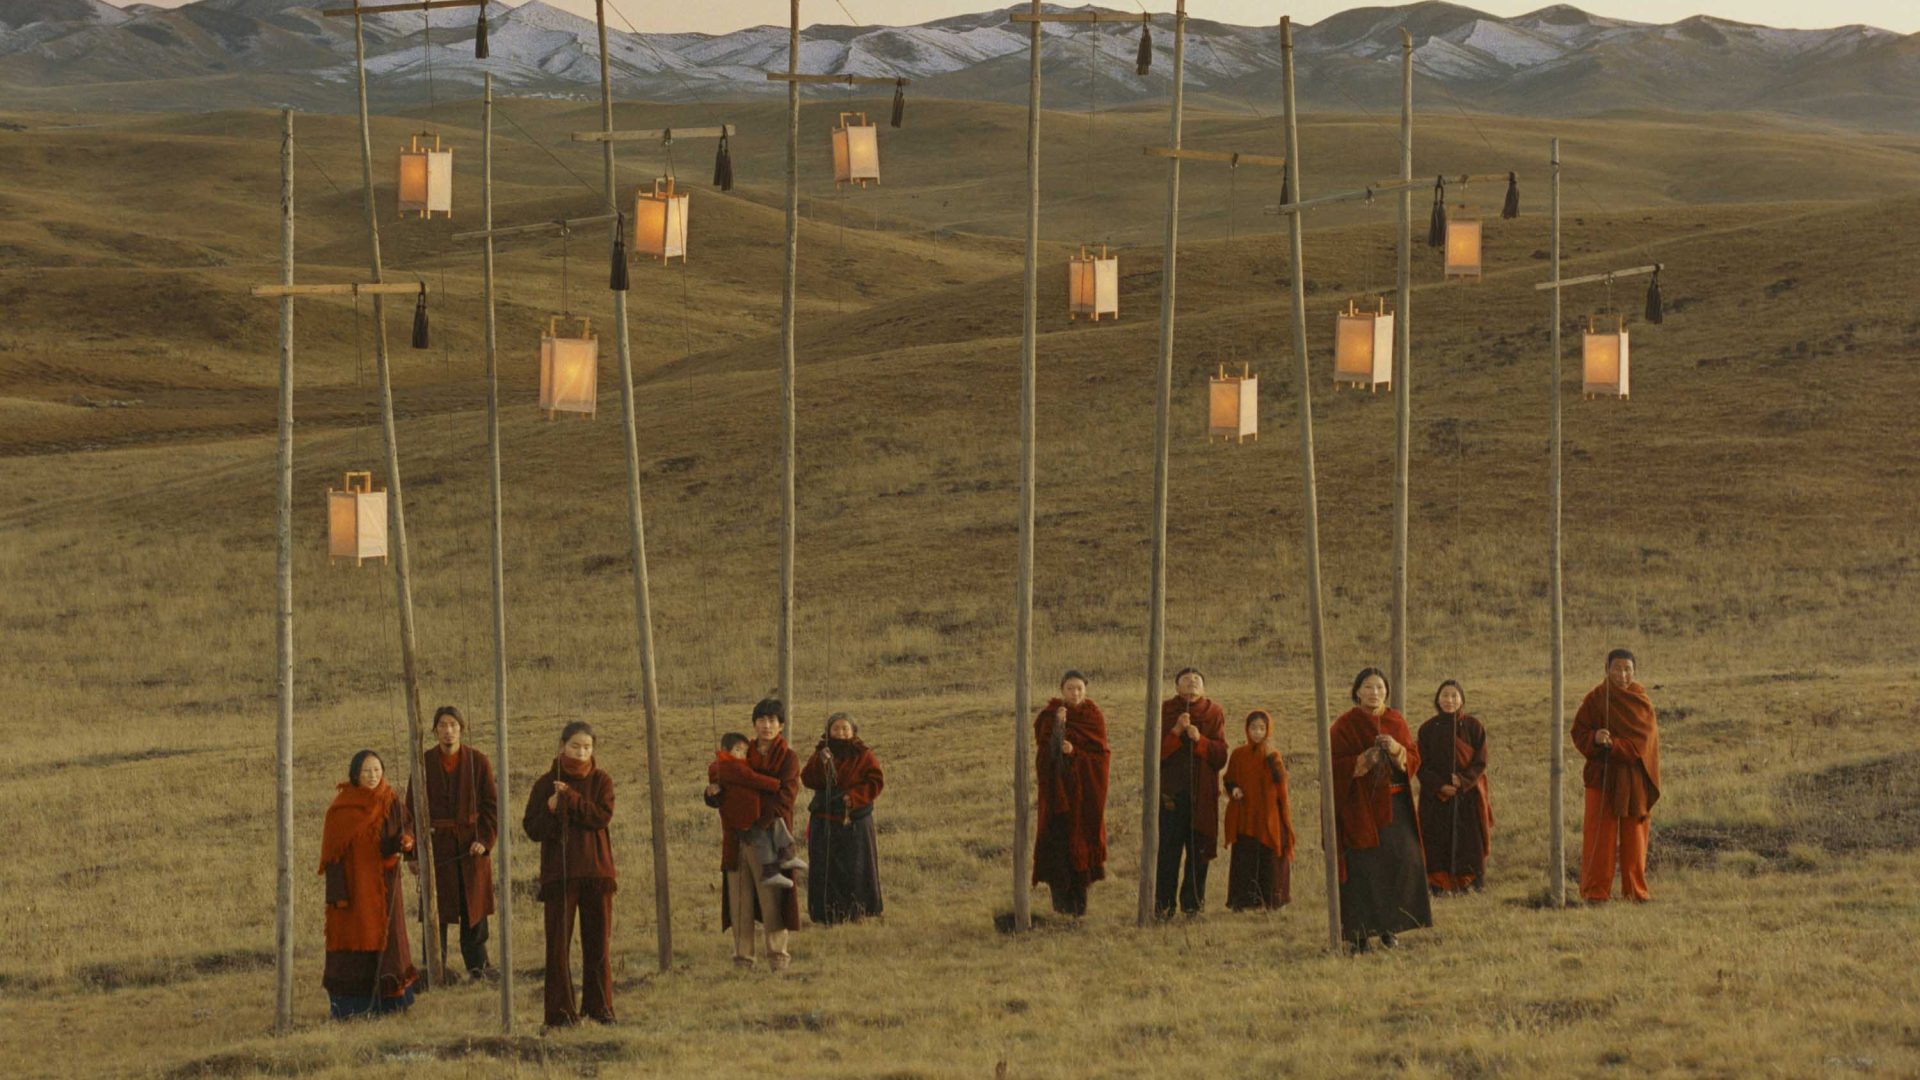 Nomads wearing red and holding lanterns on a hill.